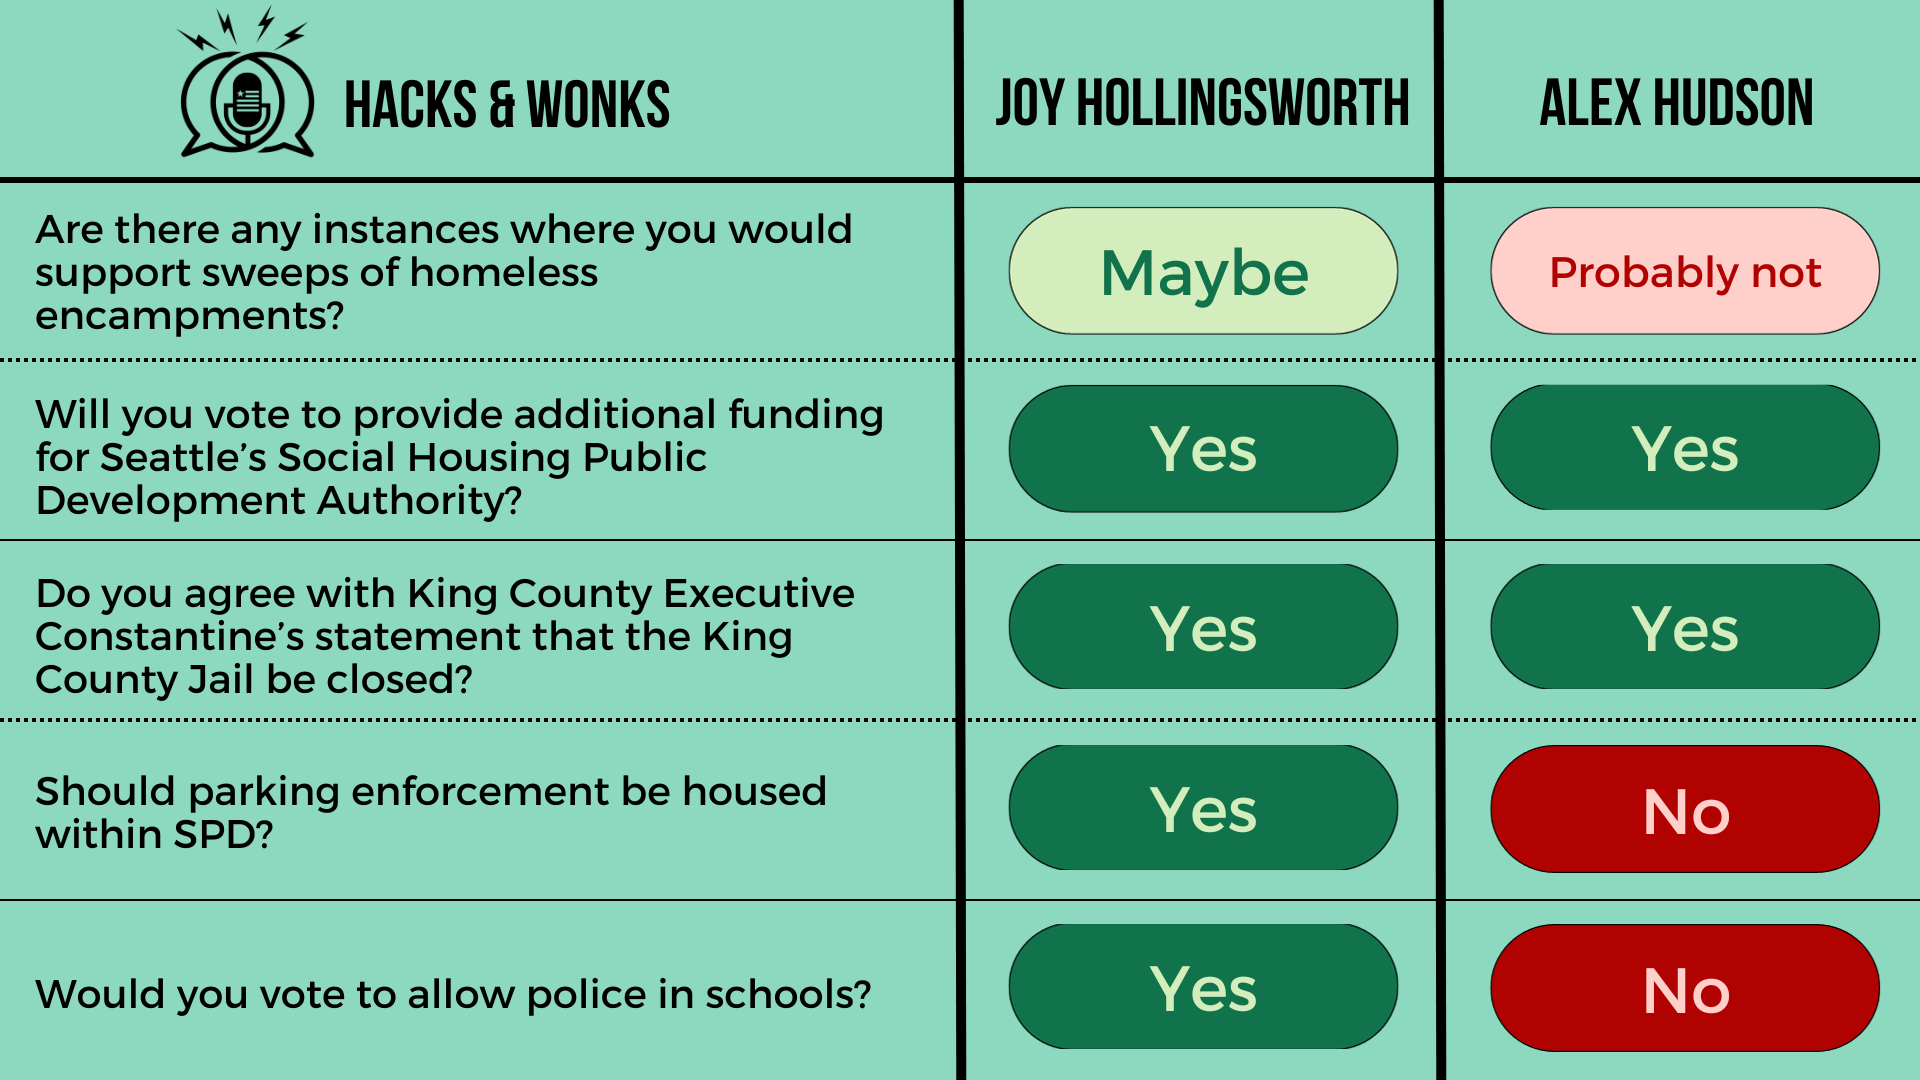 Q: Are there any instances where you would support sweeps of homeless encampments? Joy Hollingsworth: Maybe, Alex Hudson: Probably not  Q: Will you vote to provide additional funding for Seattle’s Social Housing Public Development Authority? Joy Holl